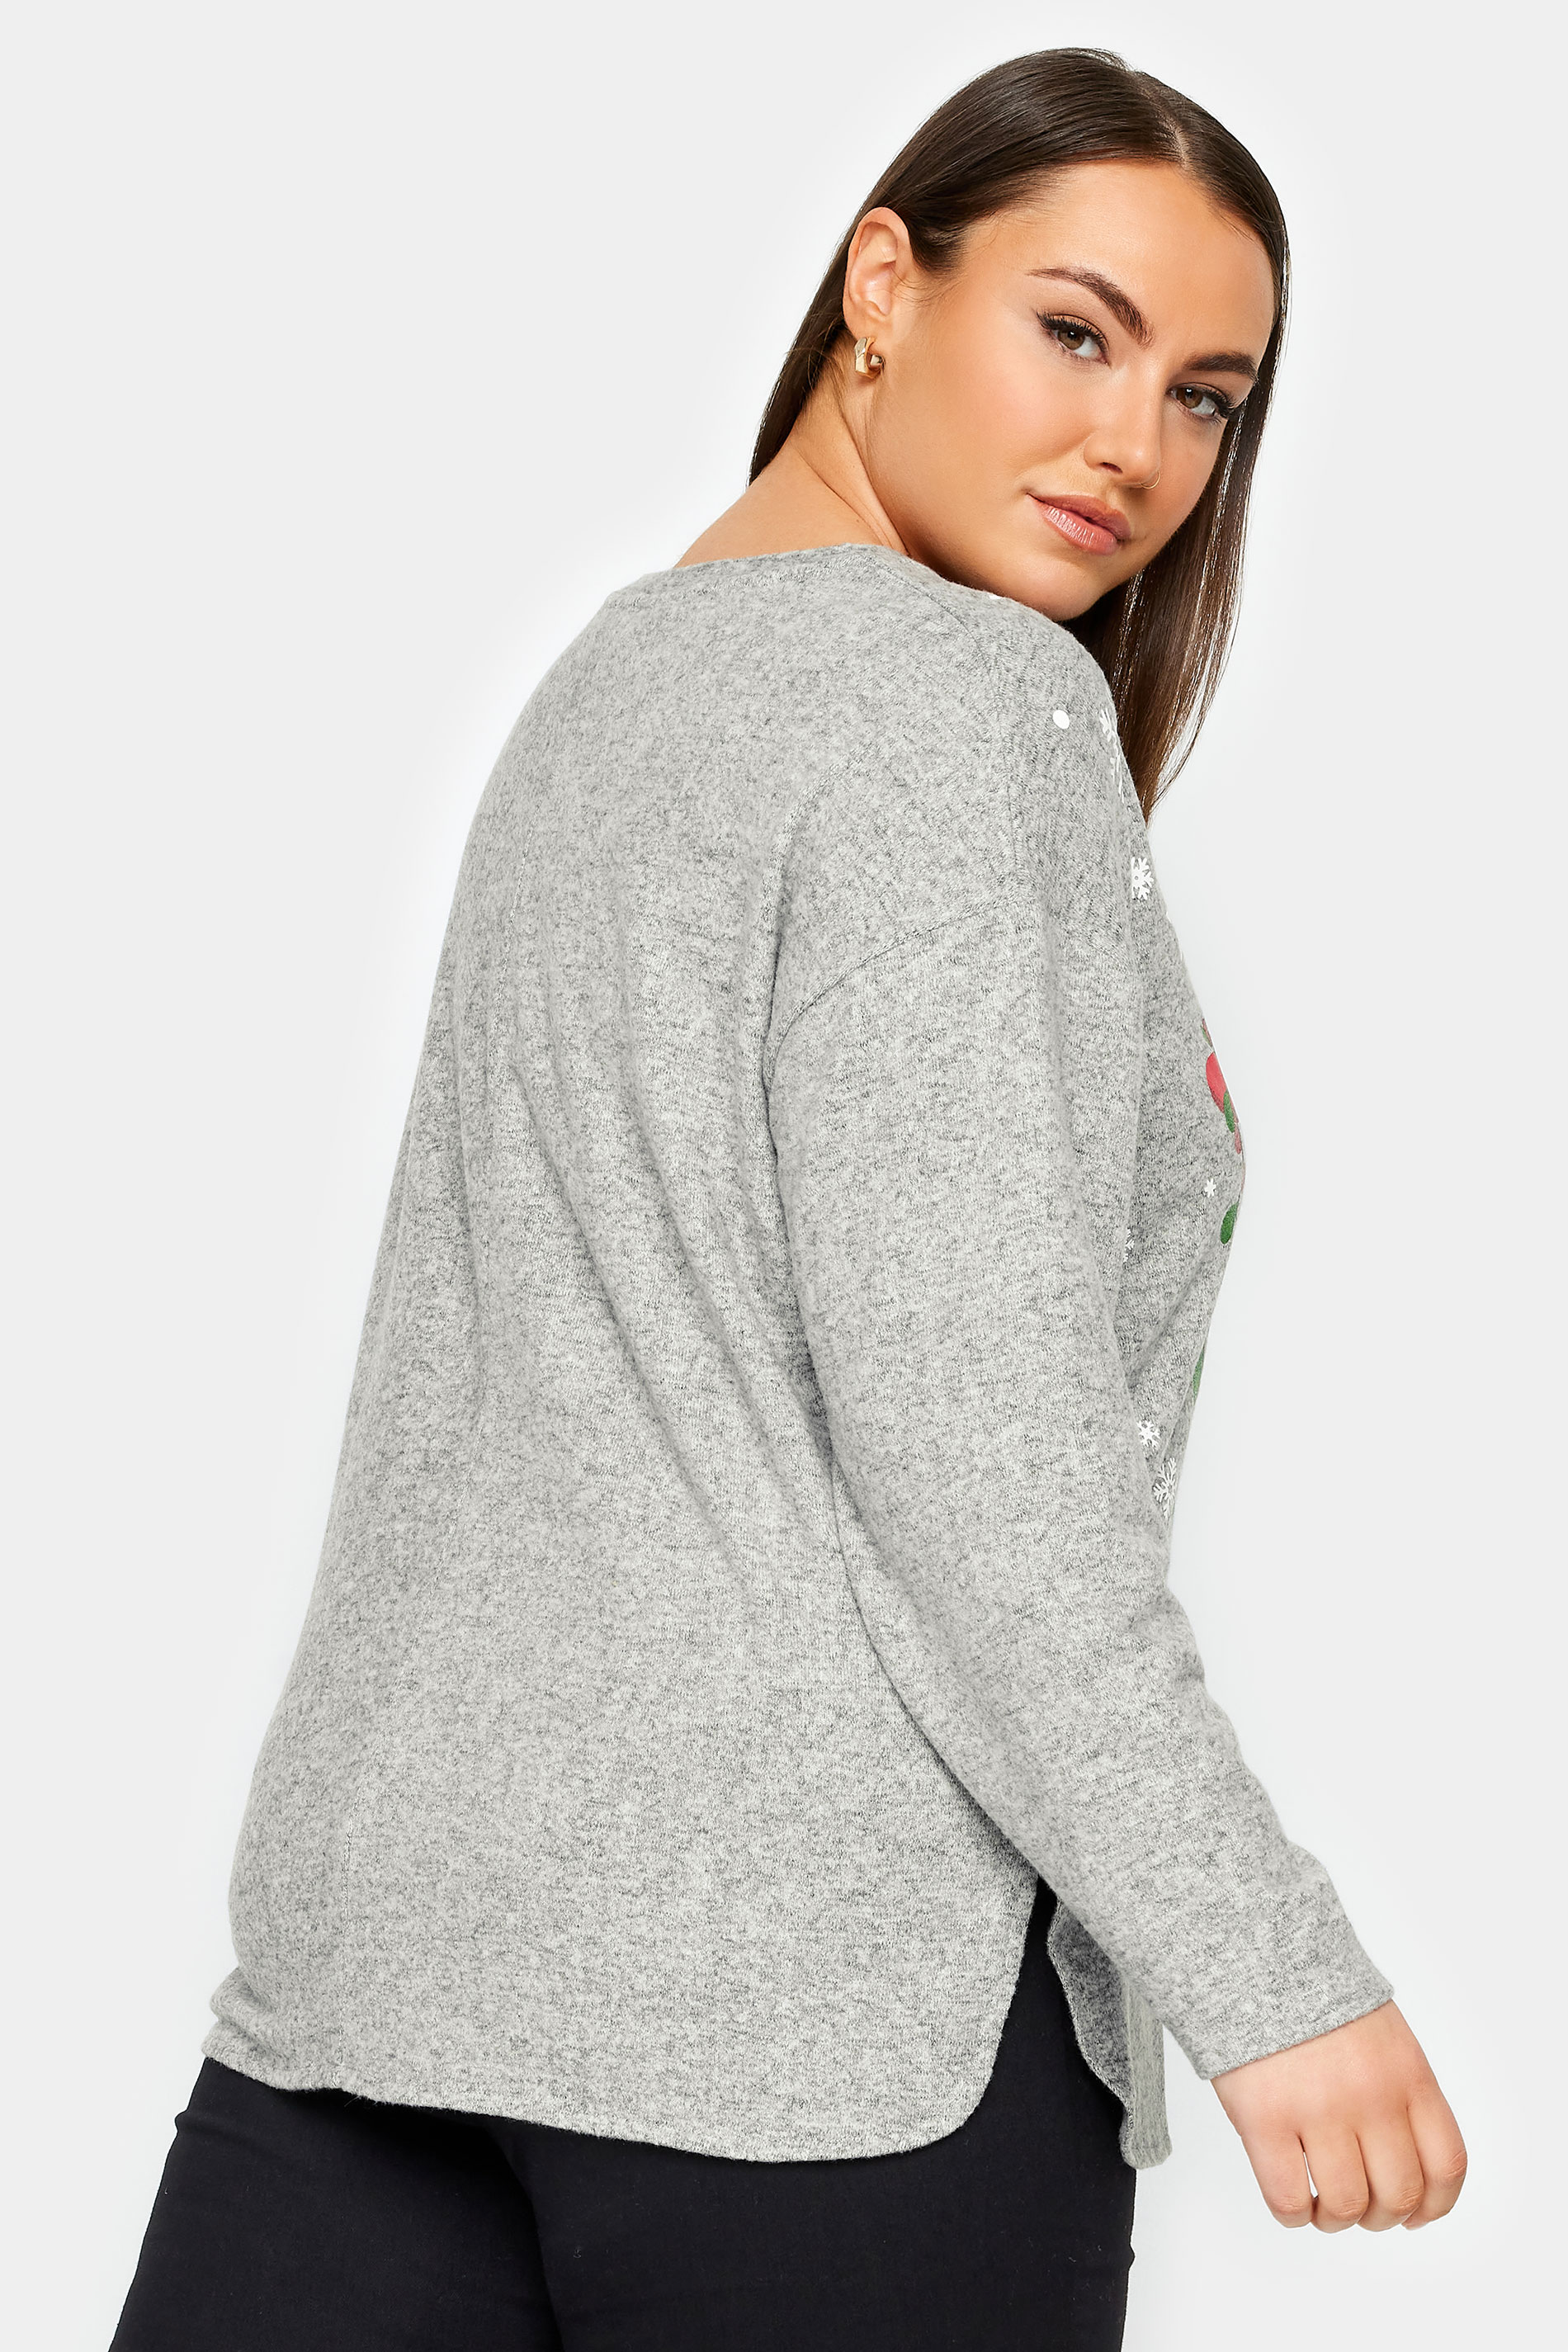 YOURS Plus Size Grey Snowman Print Soft Touch Christmas Jumper | Yours Clothing 3